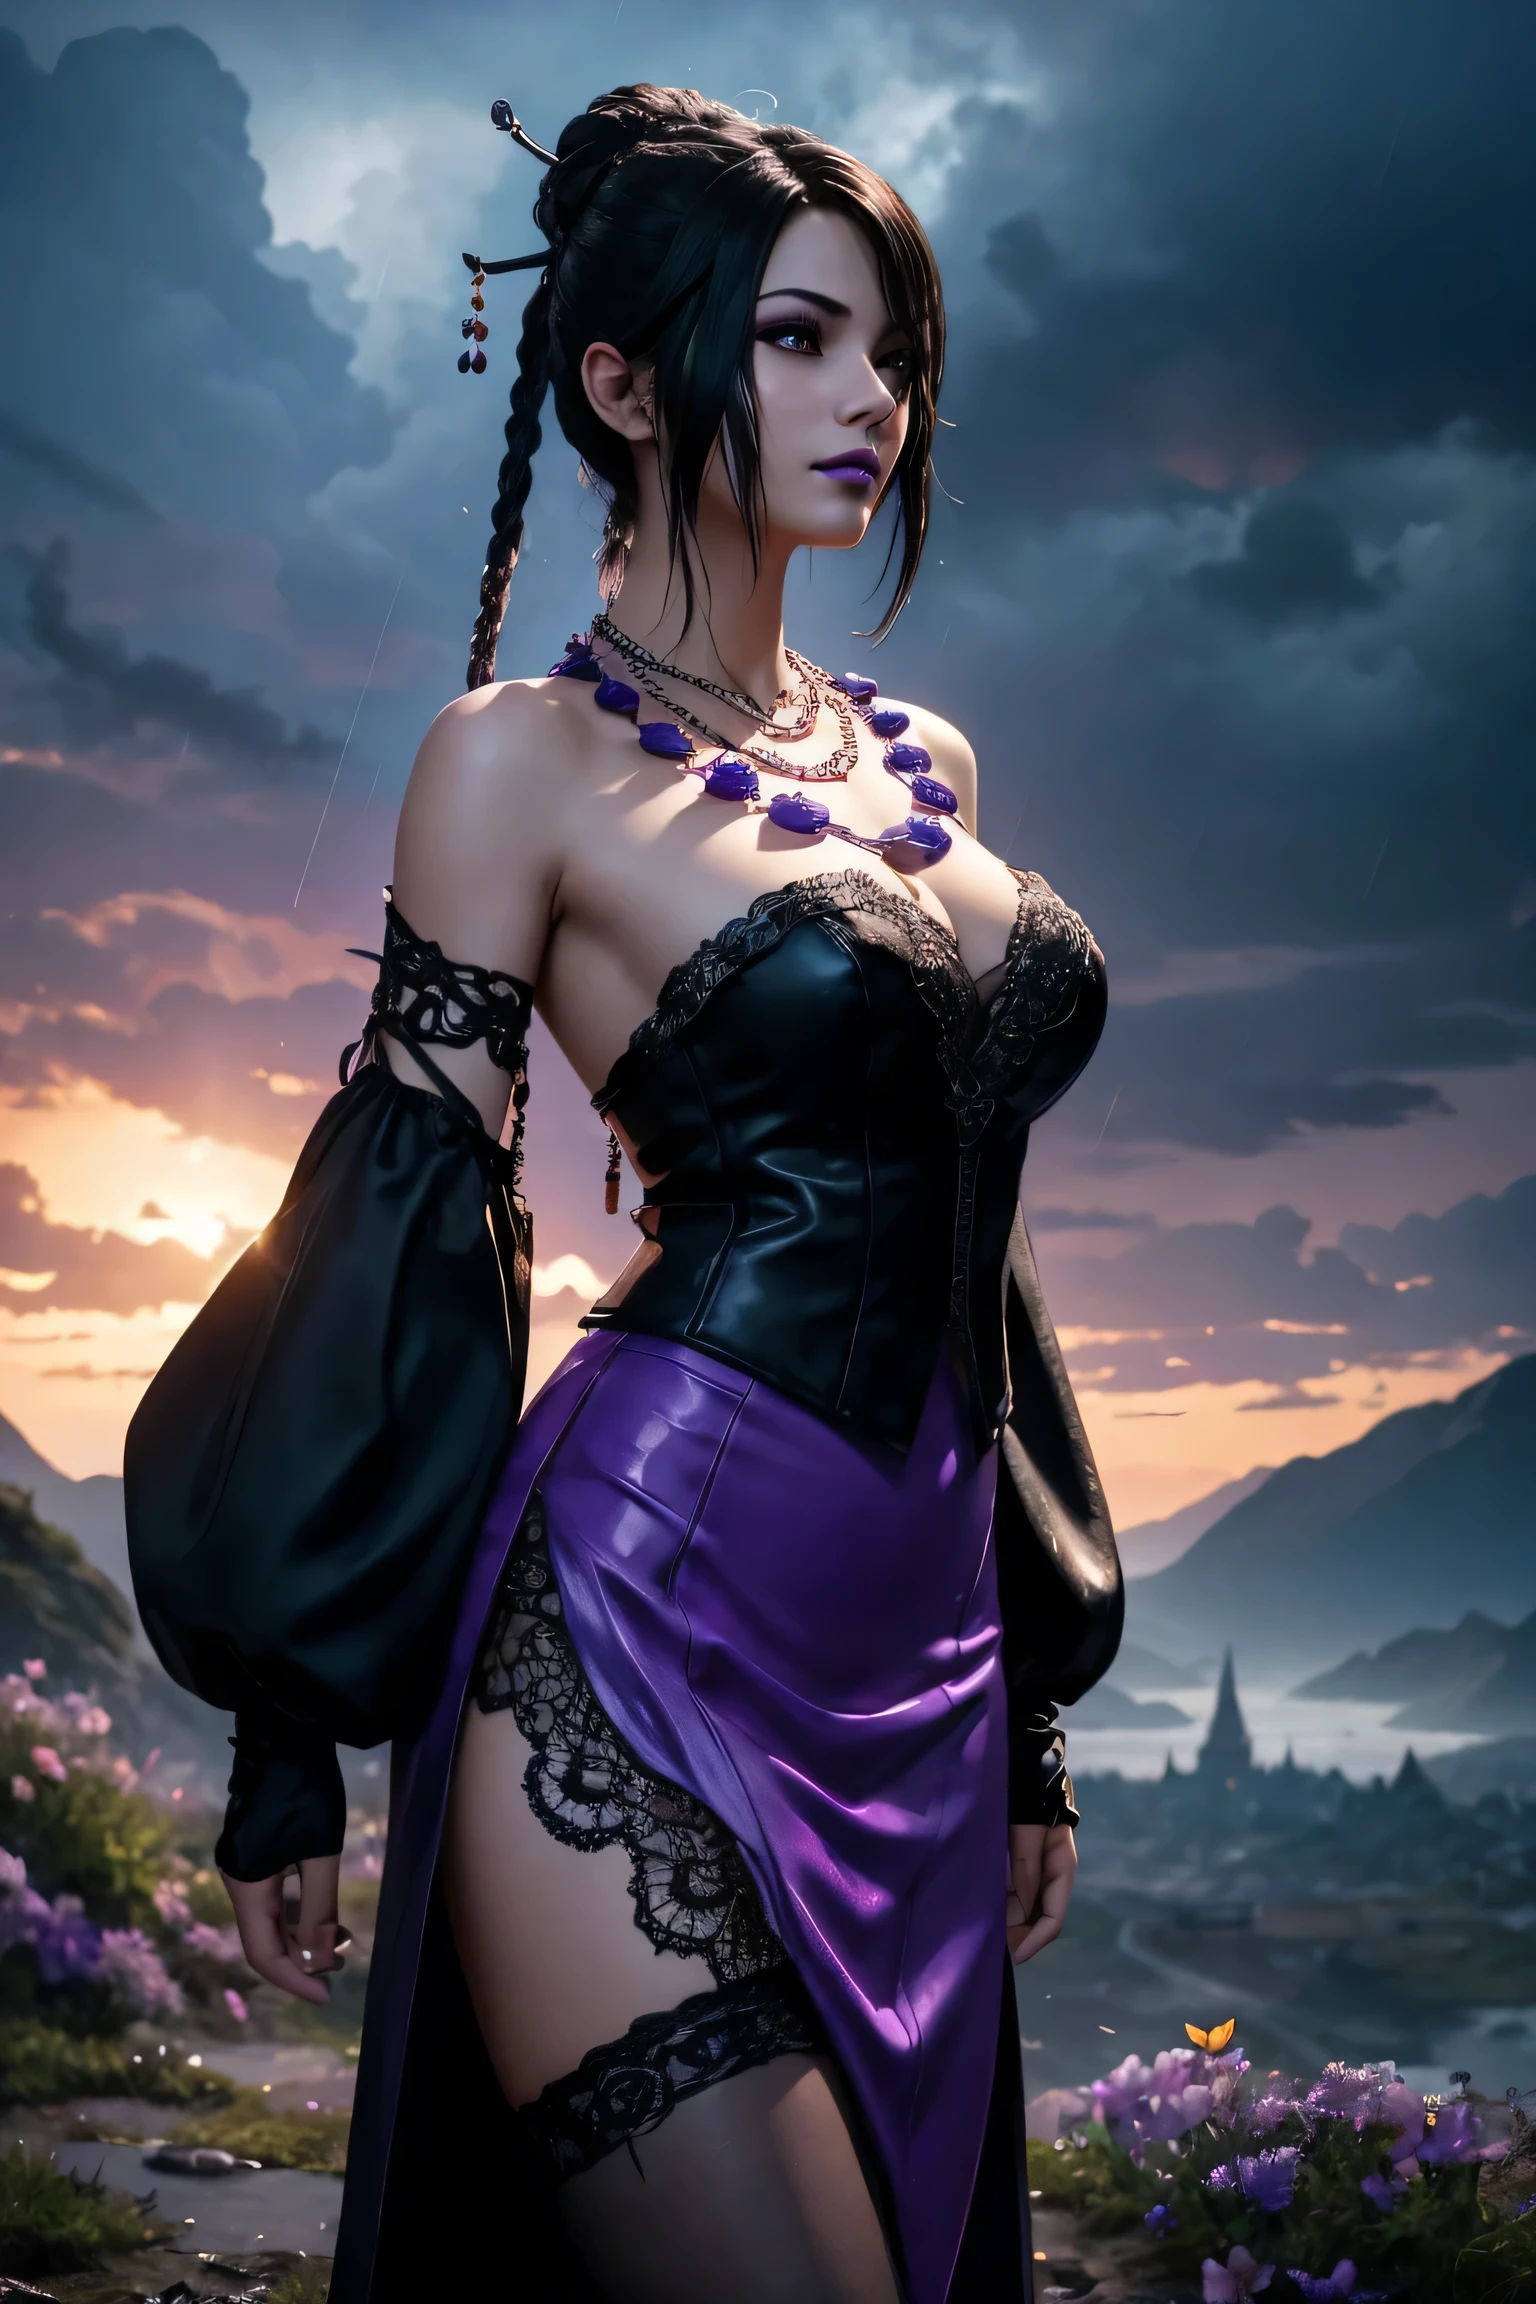 Lulu,Final Fantasy 10,FF10,Black Top,One Length,Let down one side of your bangs,Hide one eye,Beautiful purple eyes,White skin,Purple lips,Black long dress with fur,Long skirt,With fur,Black see-through blouse,Black fishnet stockings,Purple Necklace,super high quality,super high quality,masterpiece,Digital SLR,Realistic,Further details,Vivid details,Depicted in detail,Detailed face,Further details,Super detailed,Realistic skin texture,Based on anatomical grounds,Perfect Anatomy,Anatomically correct hand,Anatomically correct fingers,Complex 3D rendering,Sexy pose,Beautiful morning glory(flower),Rainy Sky,Beautiful scenery,Fantastic rainy sky,Picturesque,Pink Lips,smile,Fantastic butterflies々,